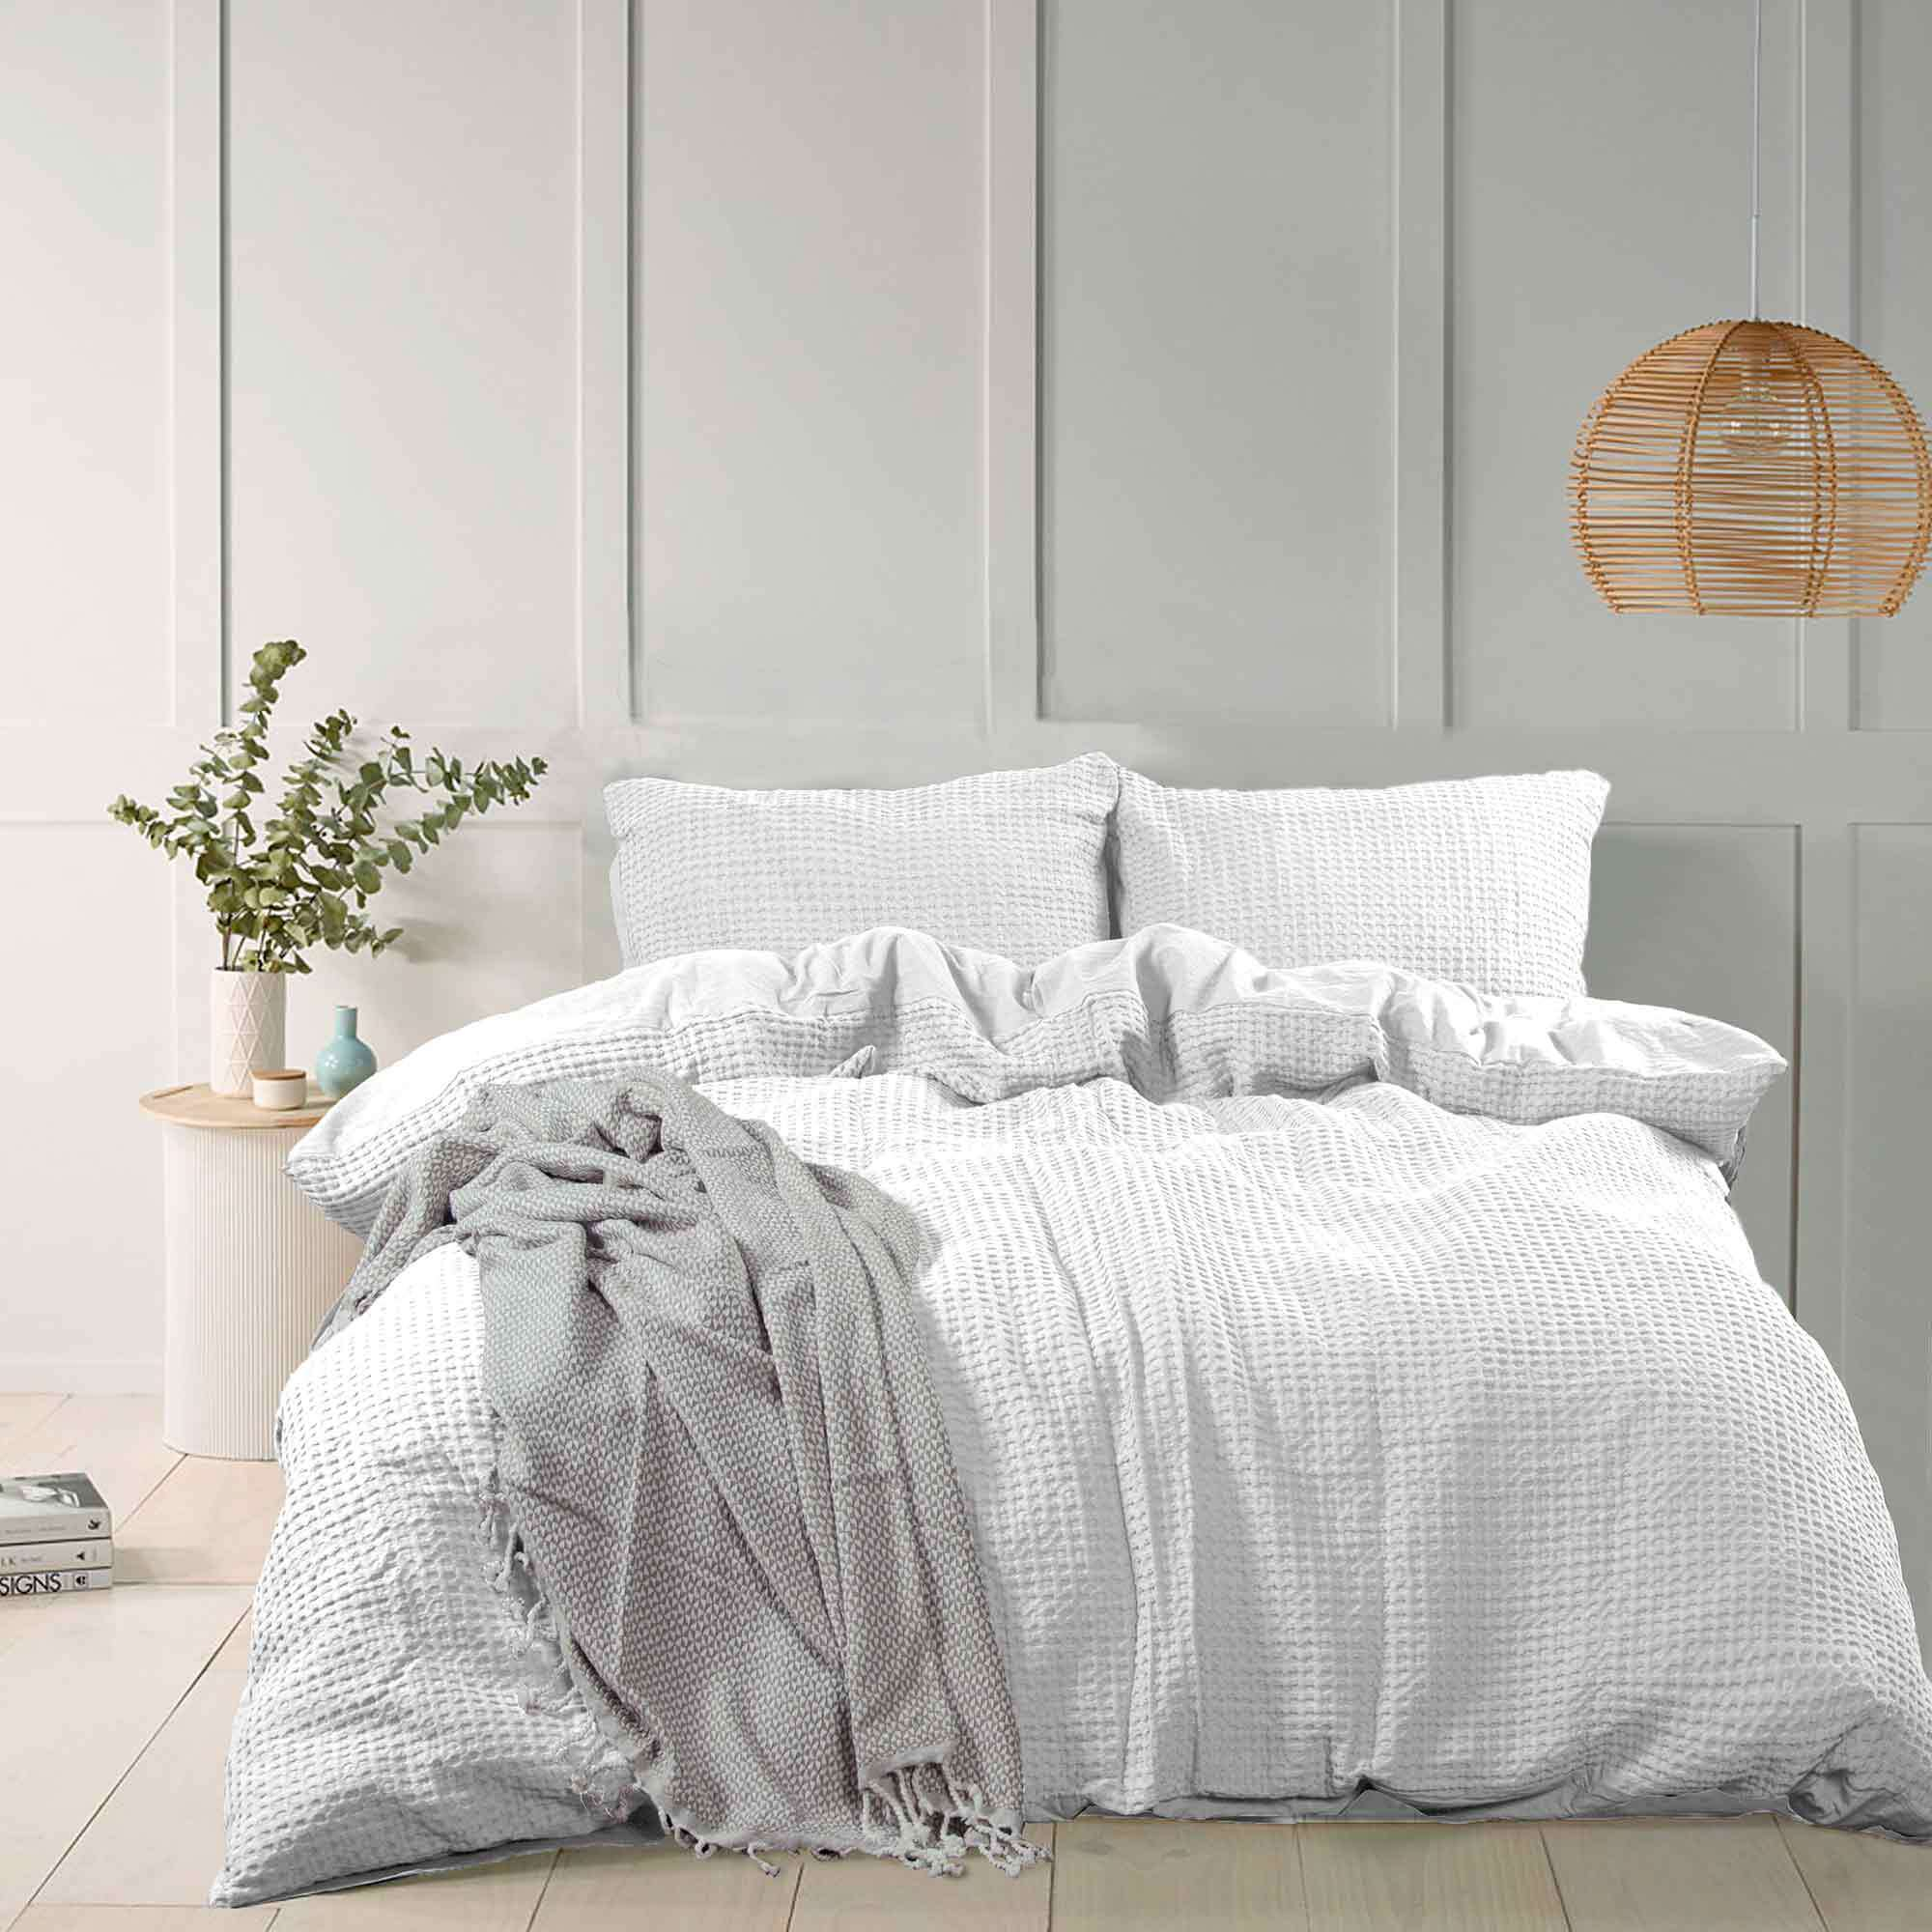 Home Garment Washed Waffle Duvet Cover, Bright White Duvet Cover